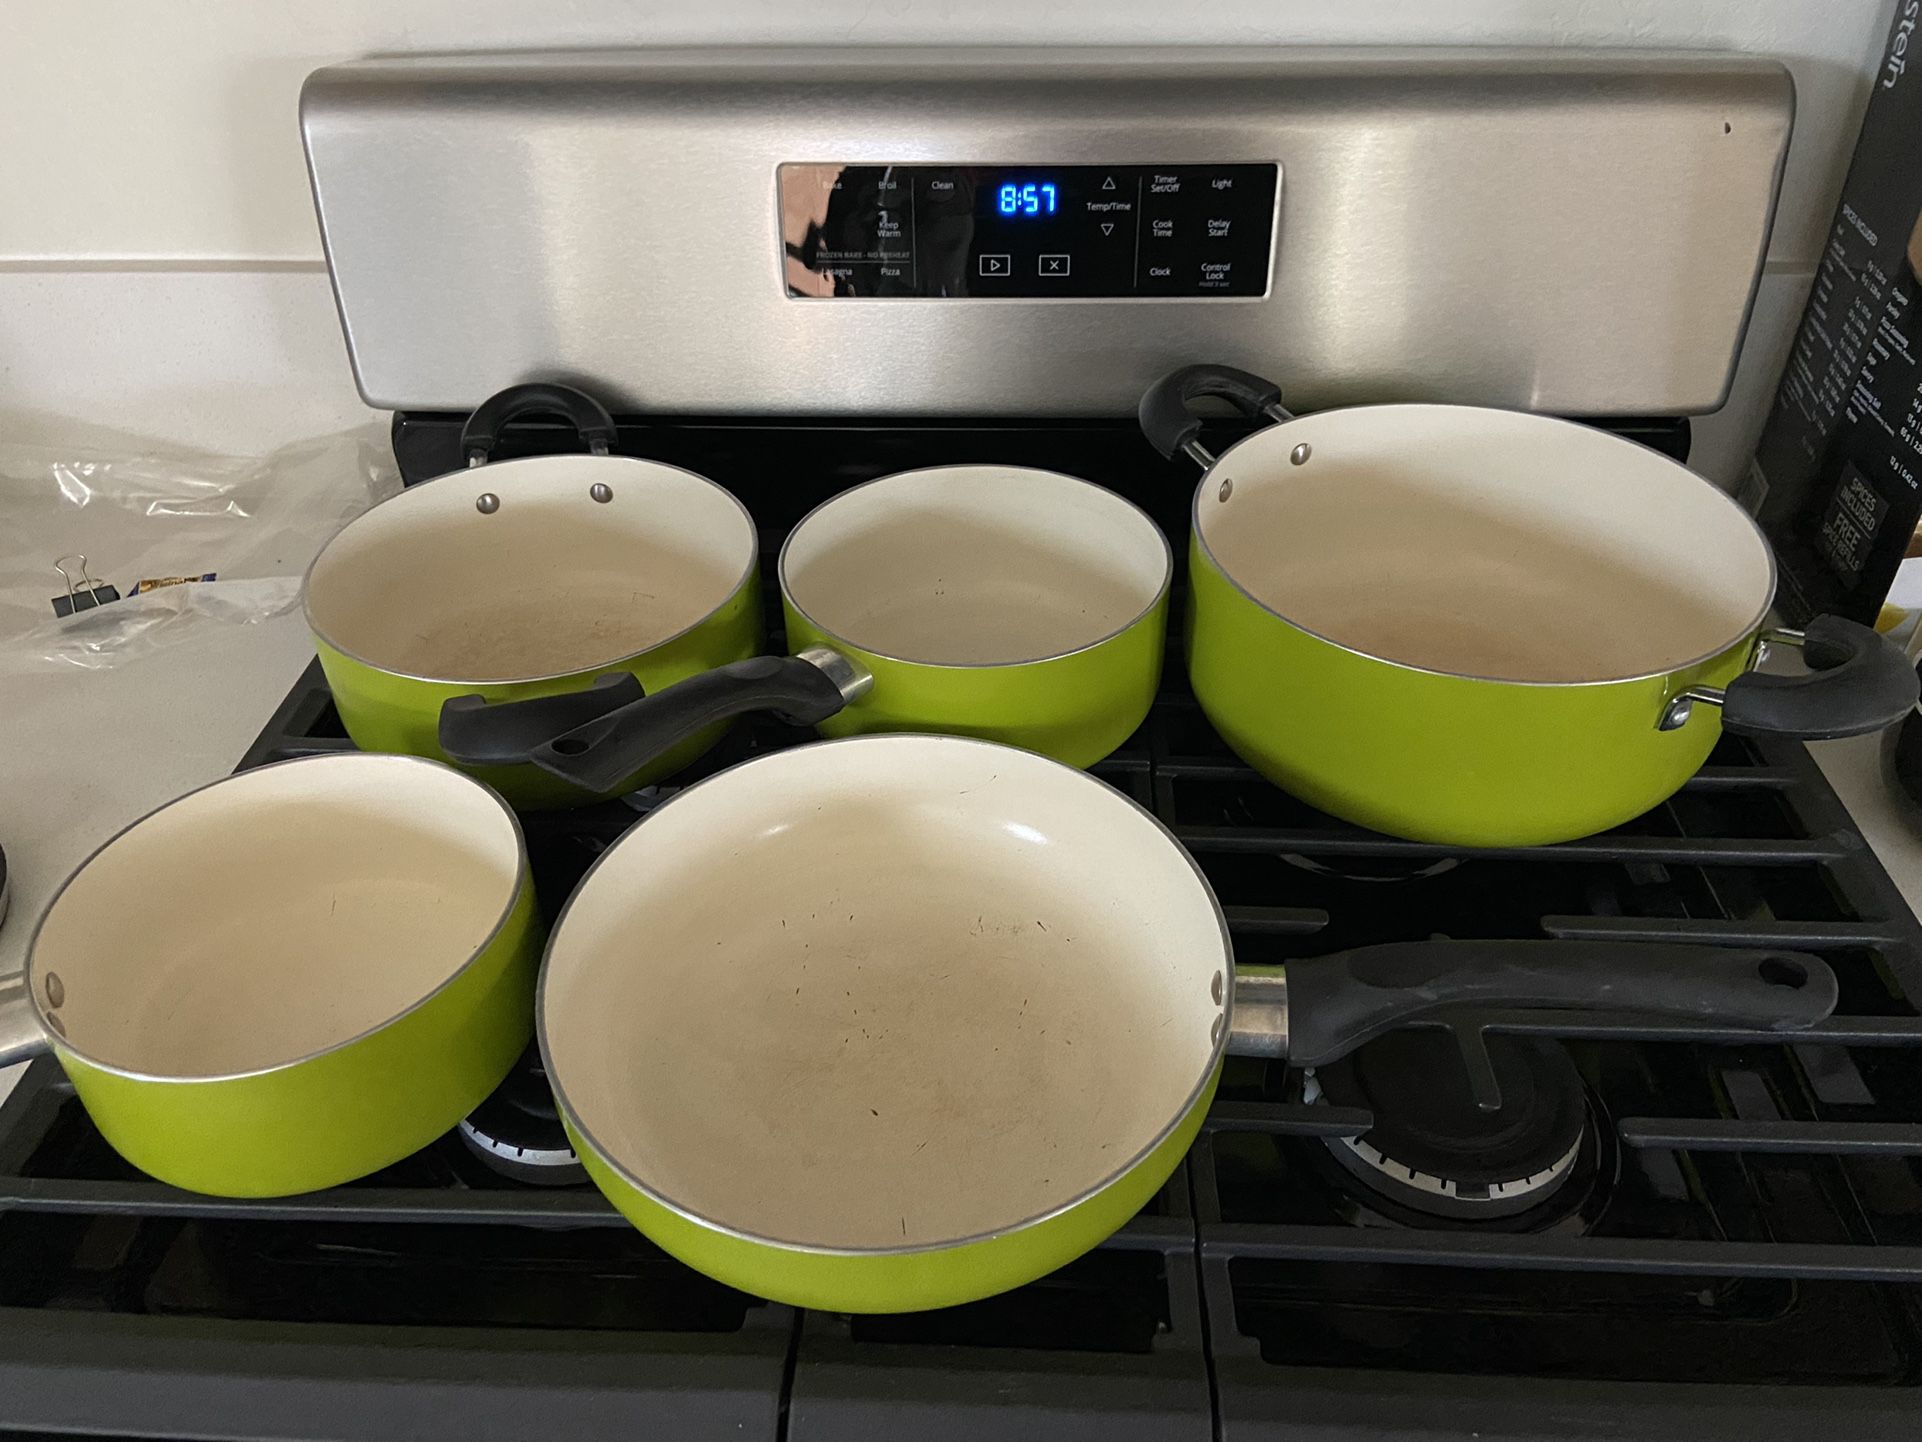 Ceramic Coated Pots And Pans Set With Lids